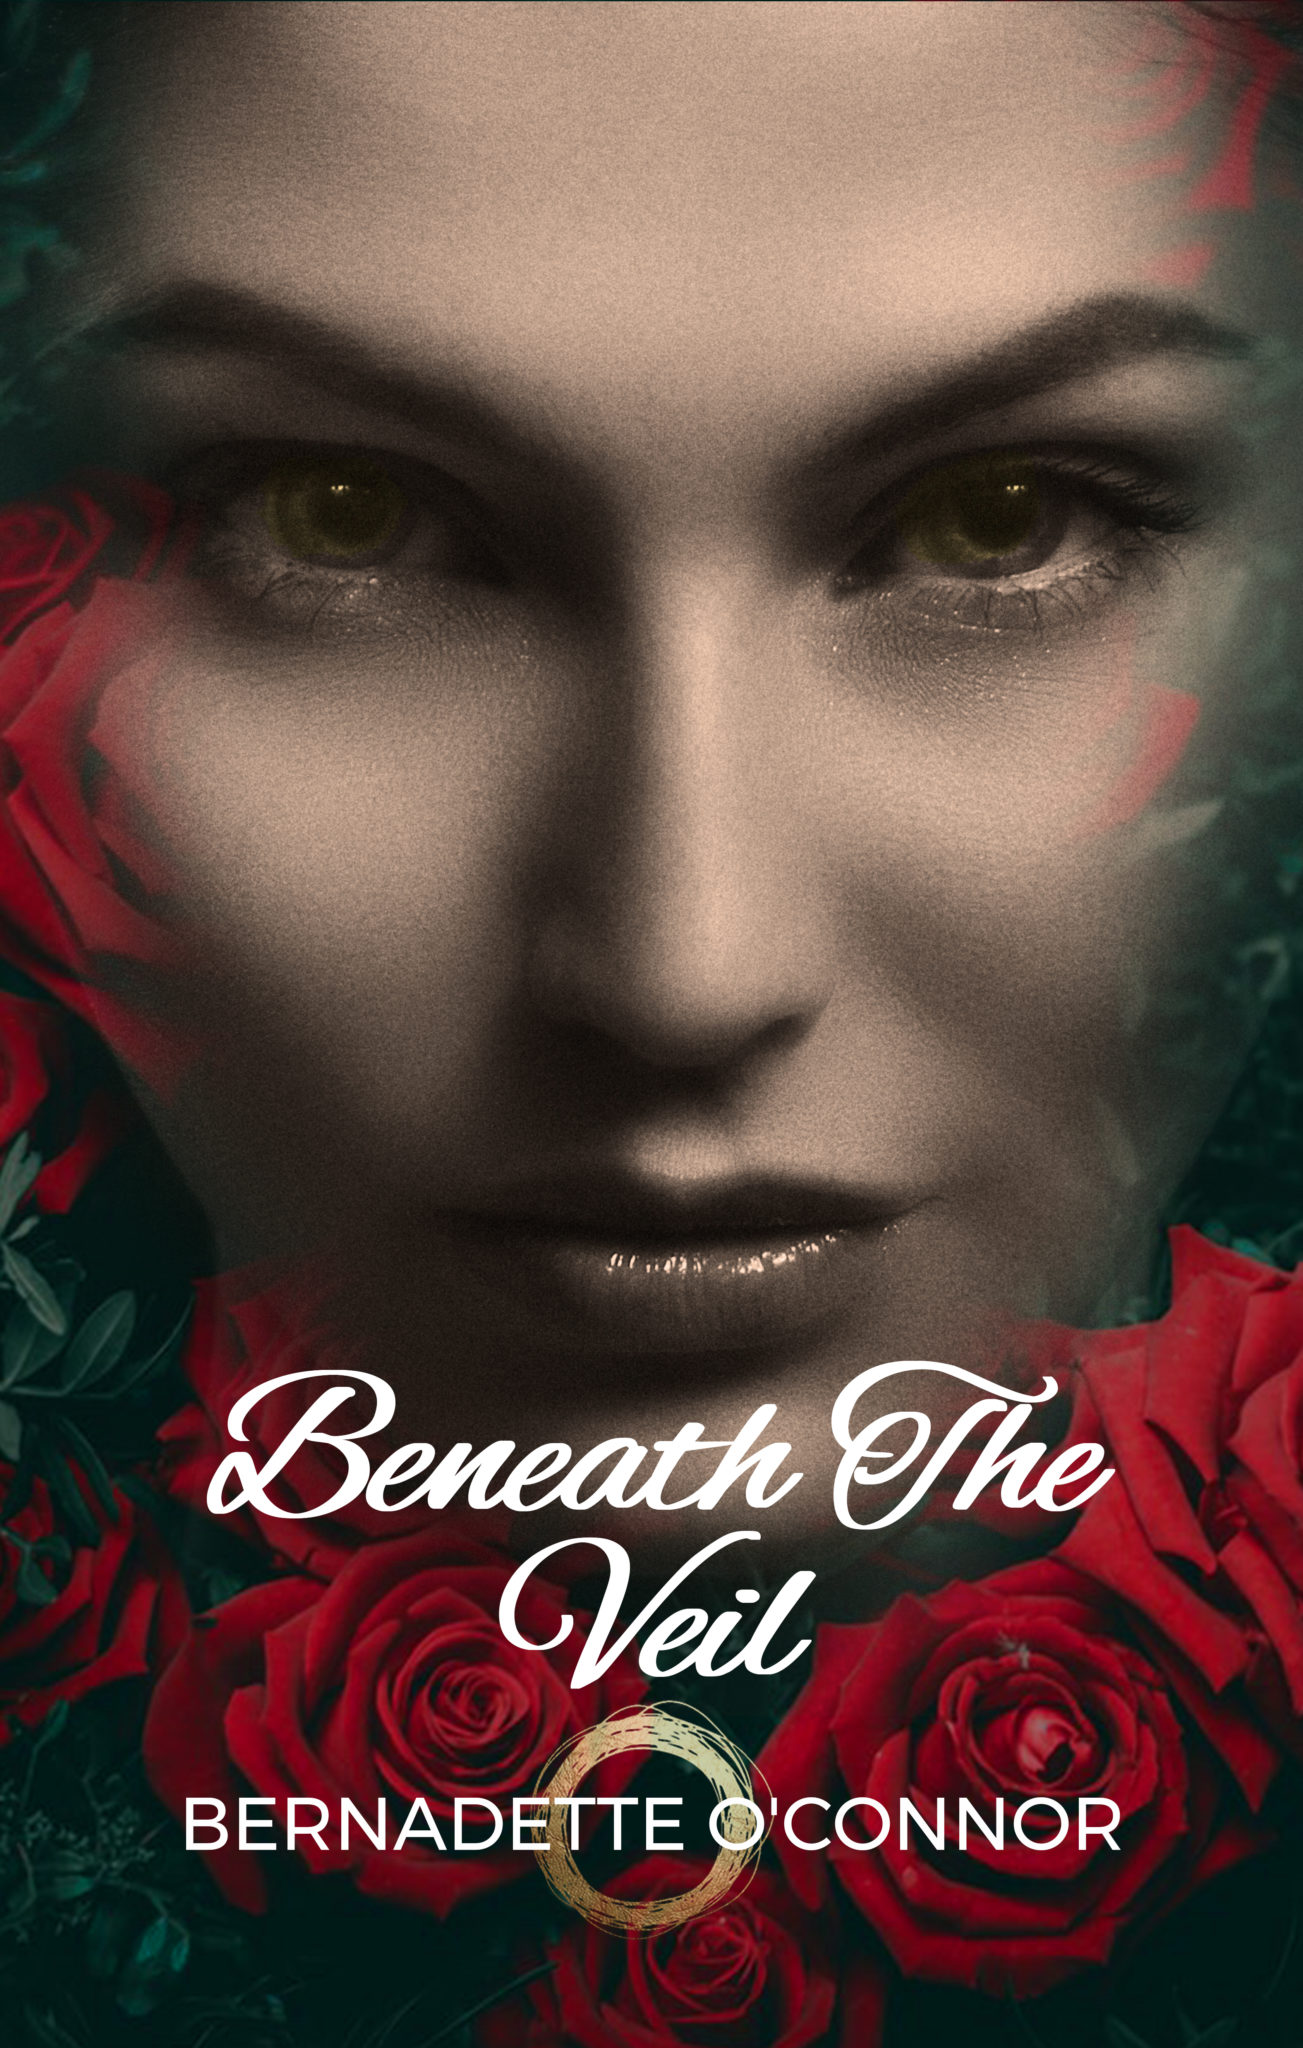 Discover What Lies ‘Beneath The Veil’ old - Bernadette O'Connor